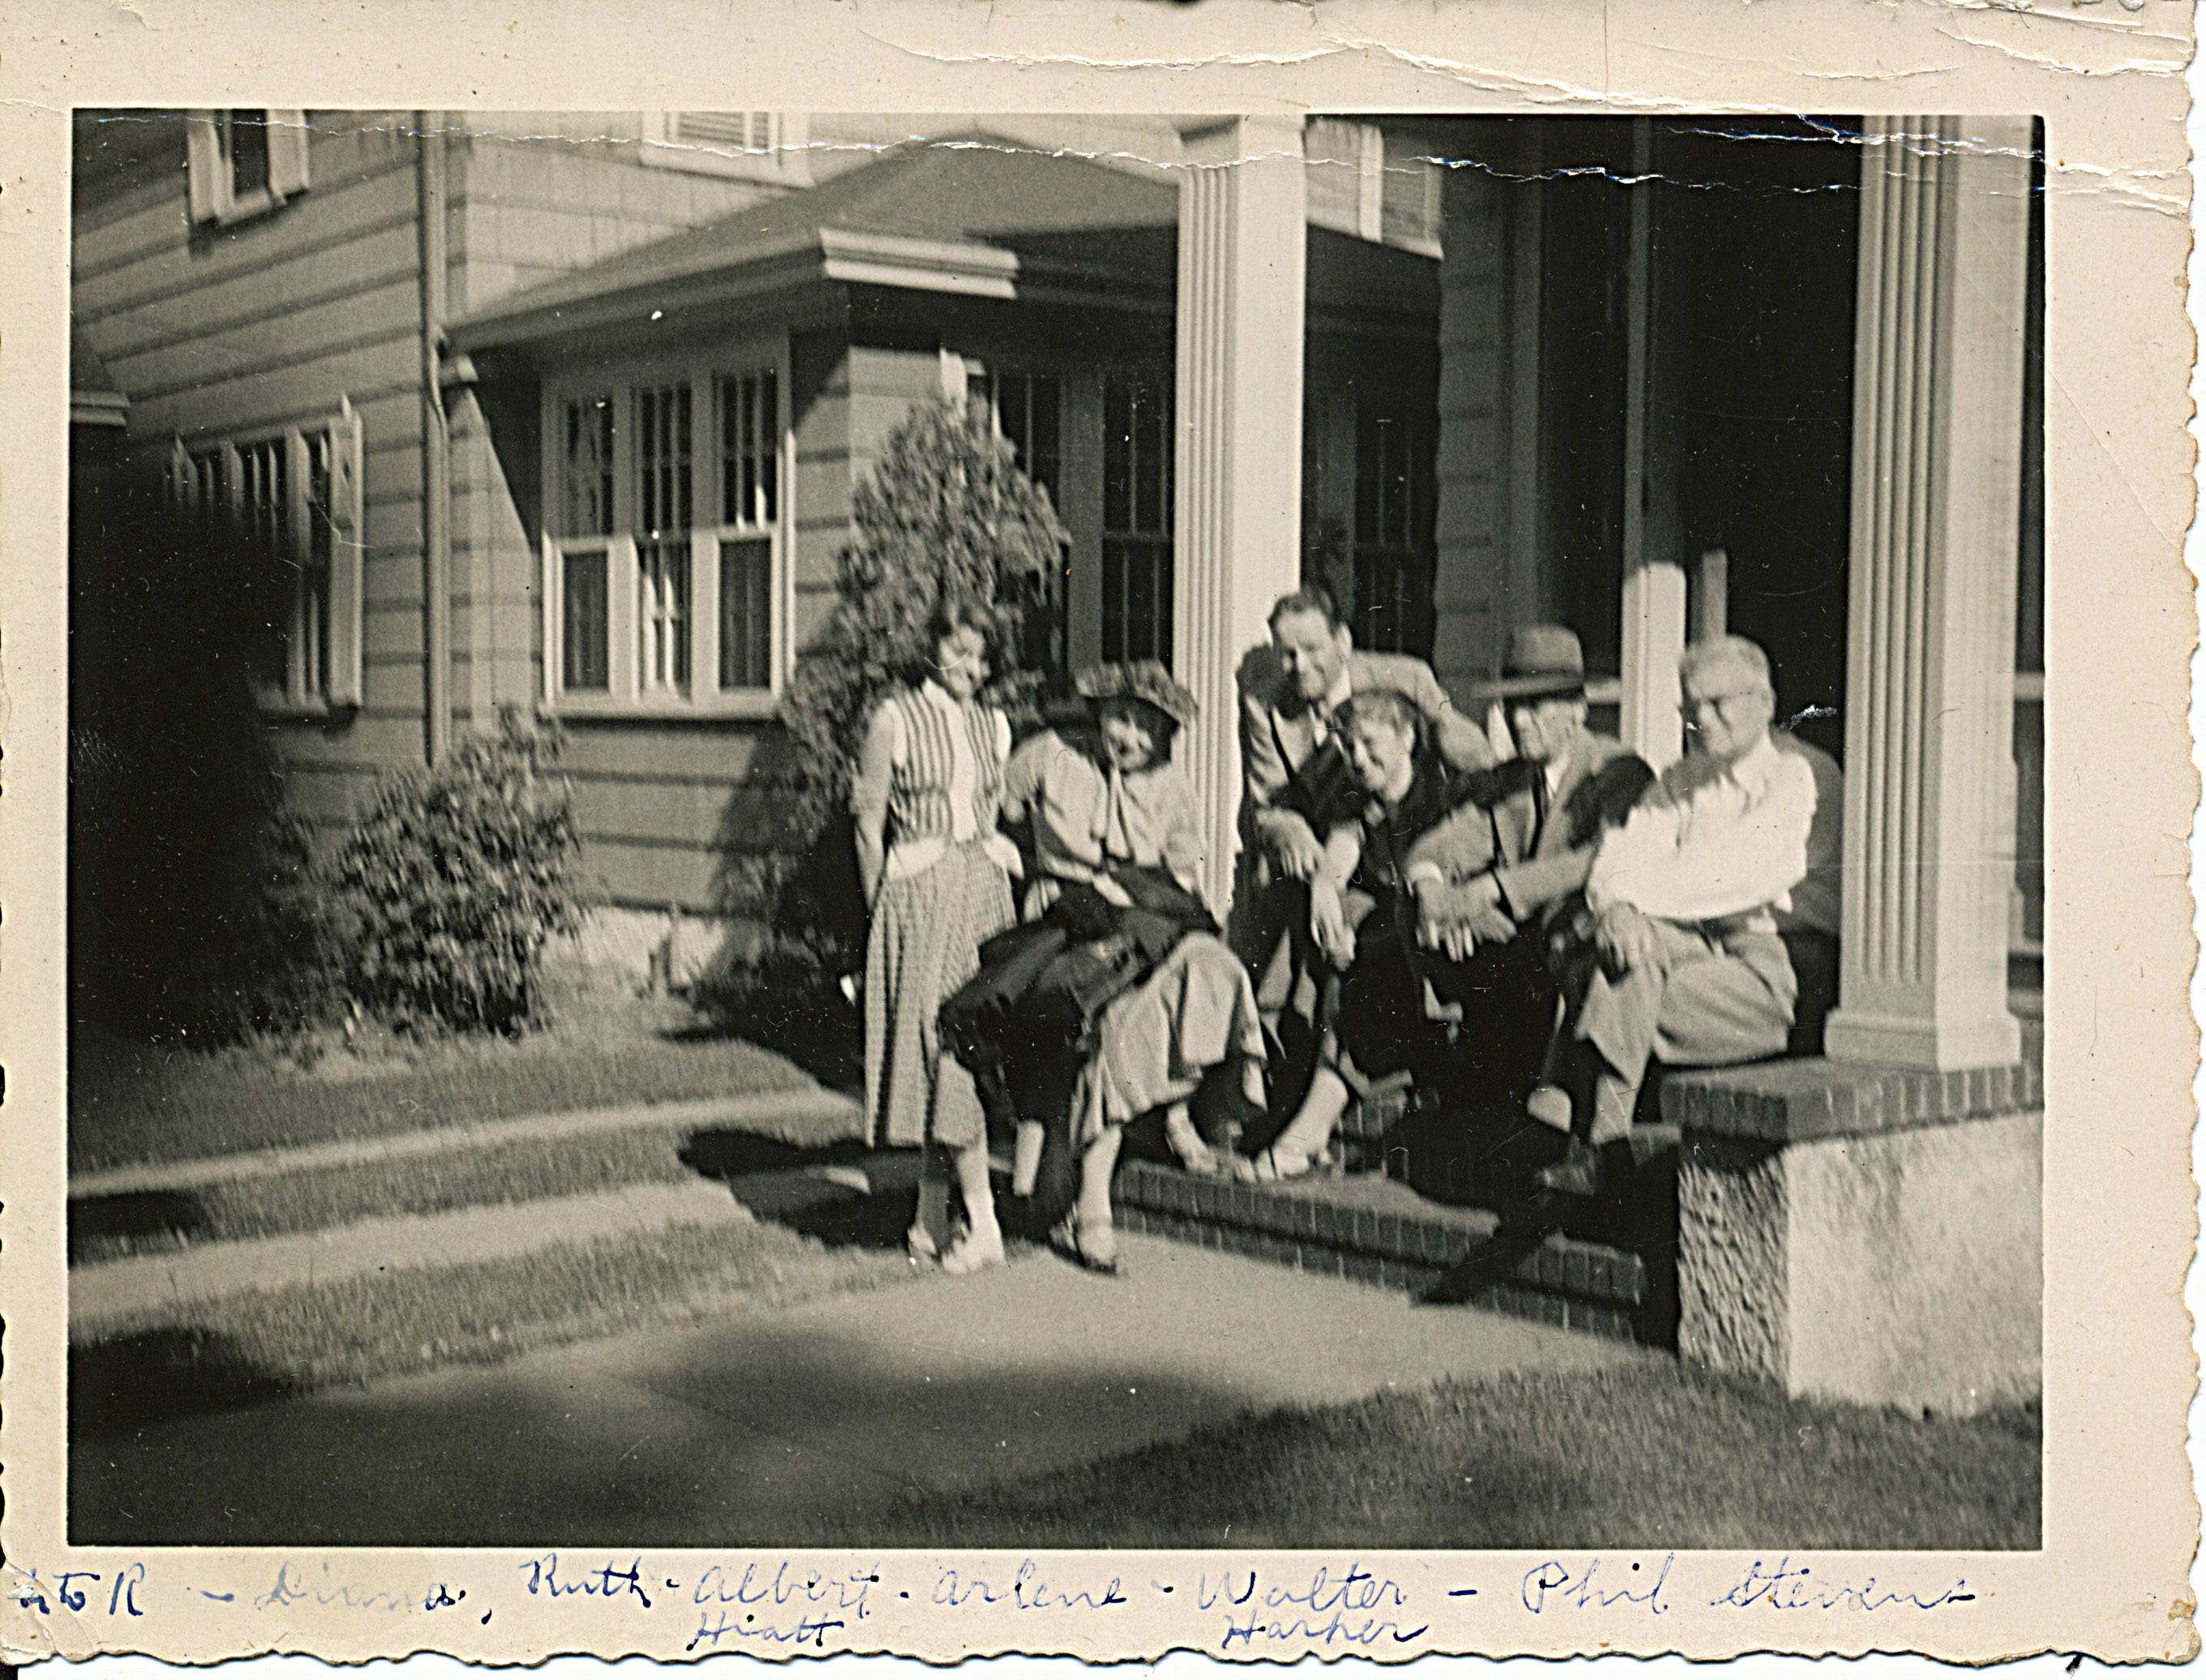 Philip with others in front of 92 Glen Avenue